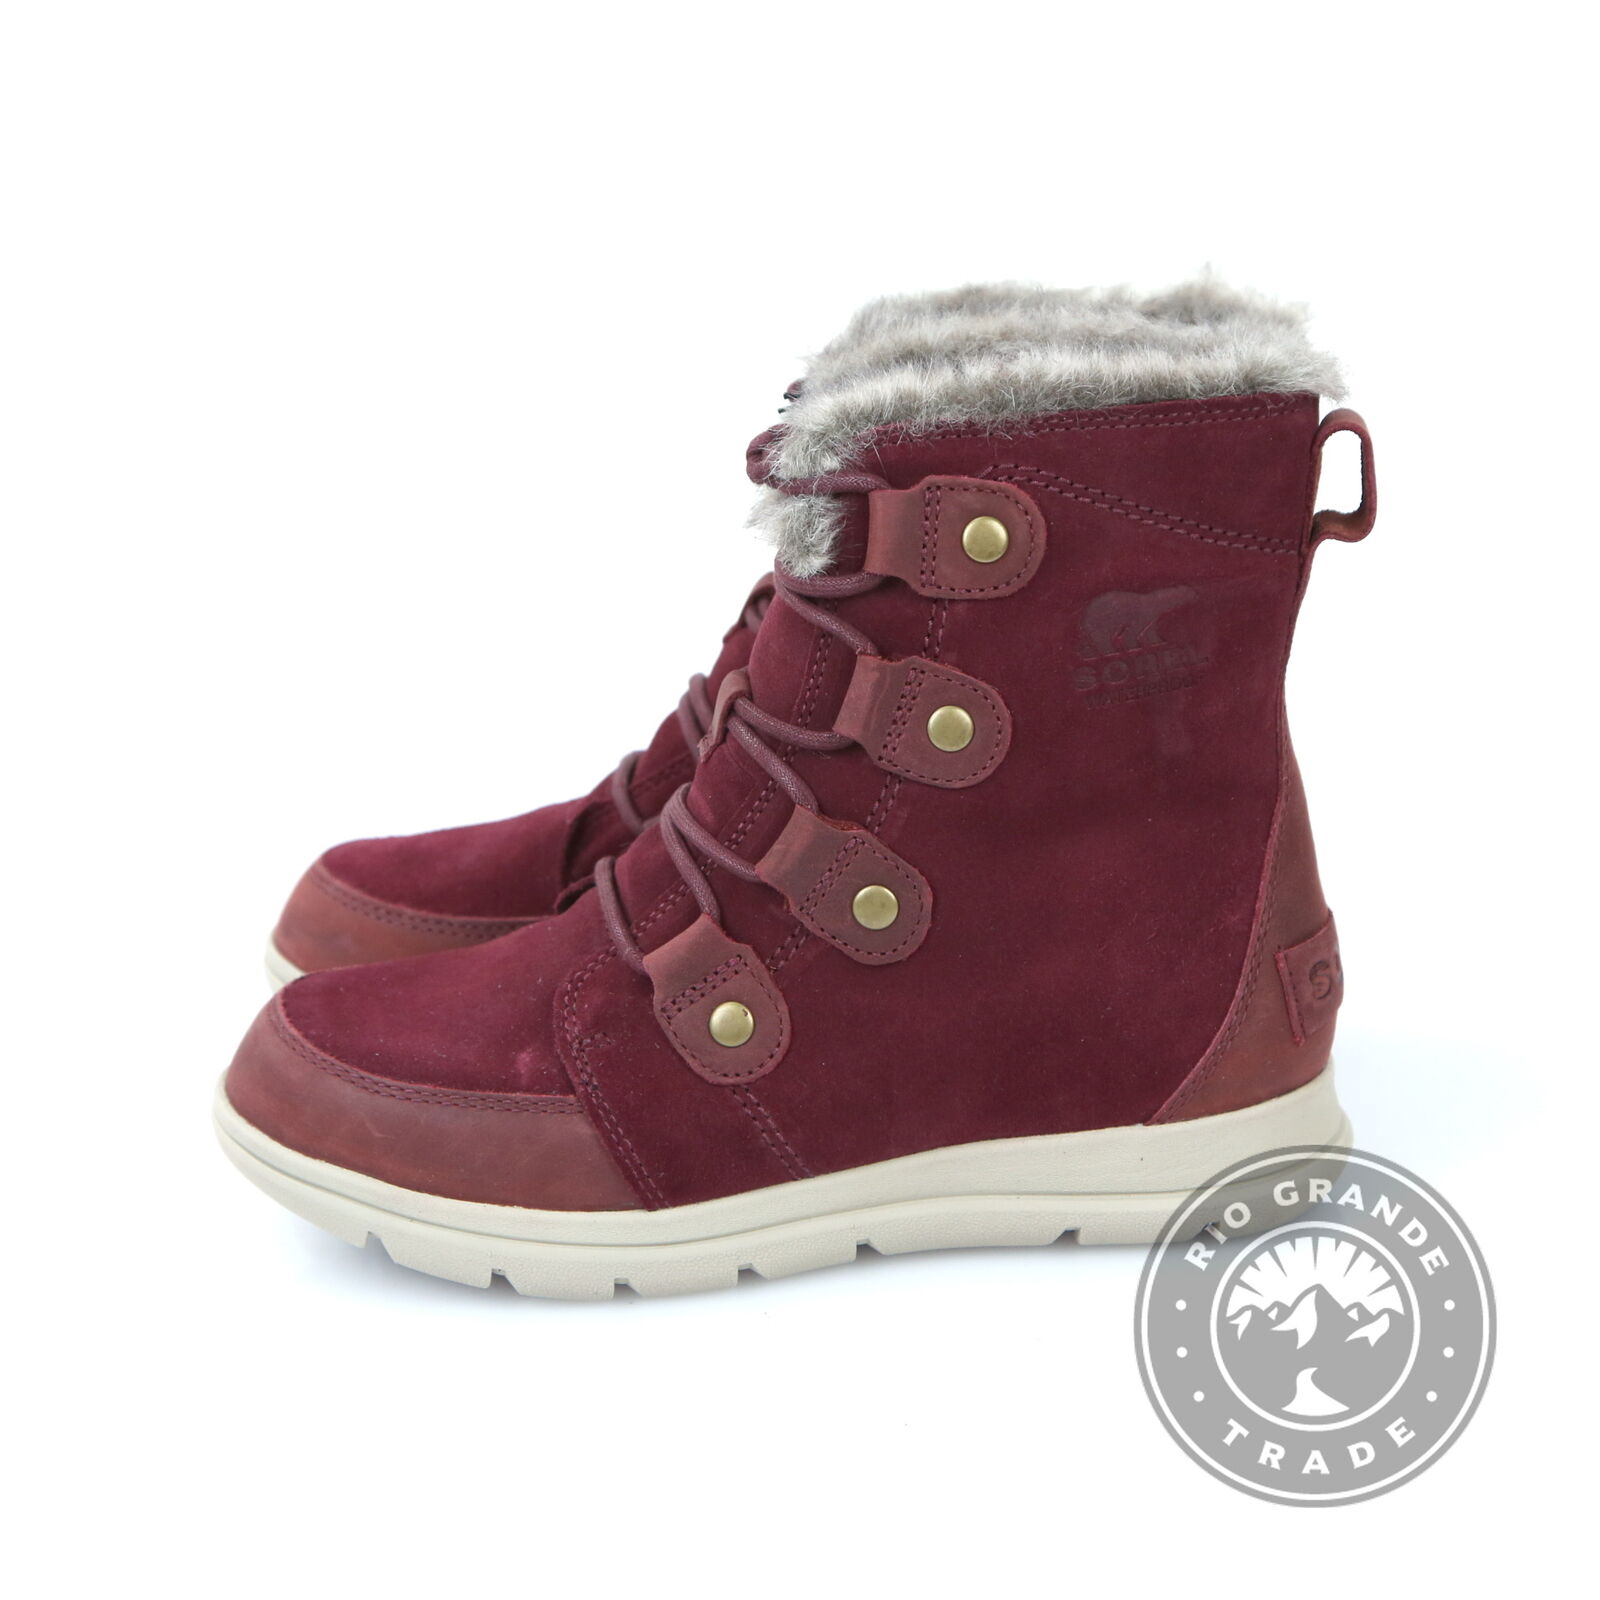 New with Defect Sorel 1808061 Snow Ankle Boots in Rich Wine Ancient Fossil - 7